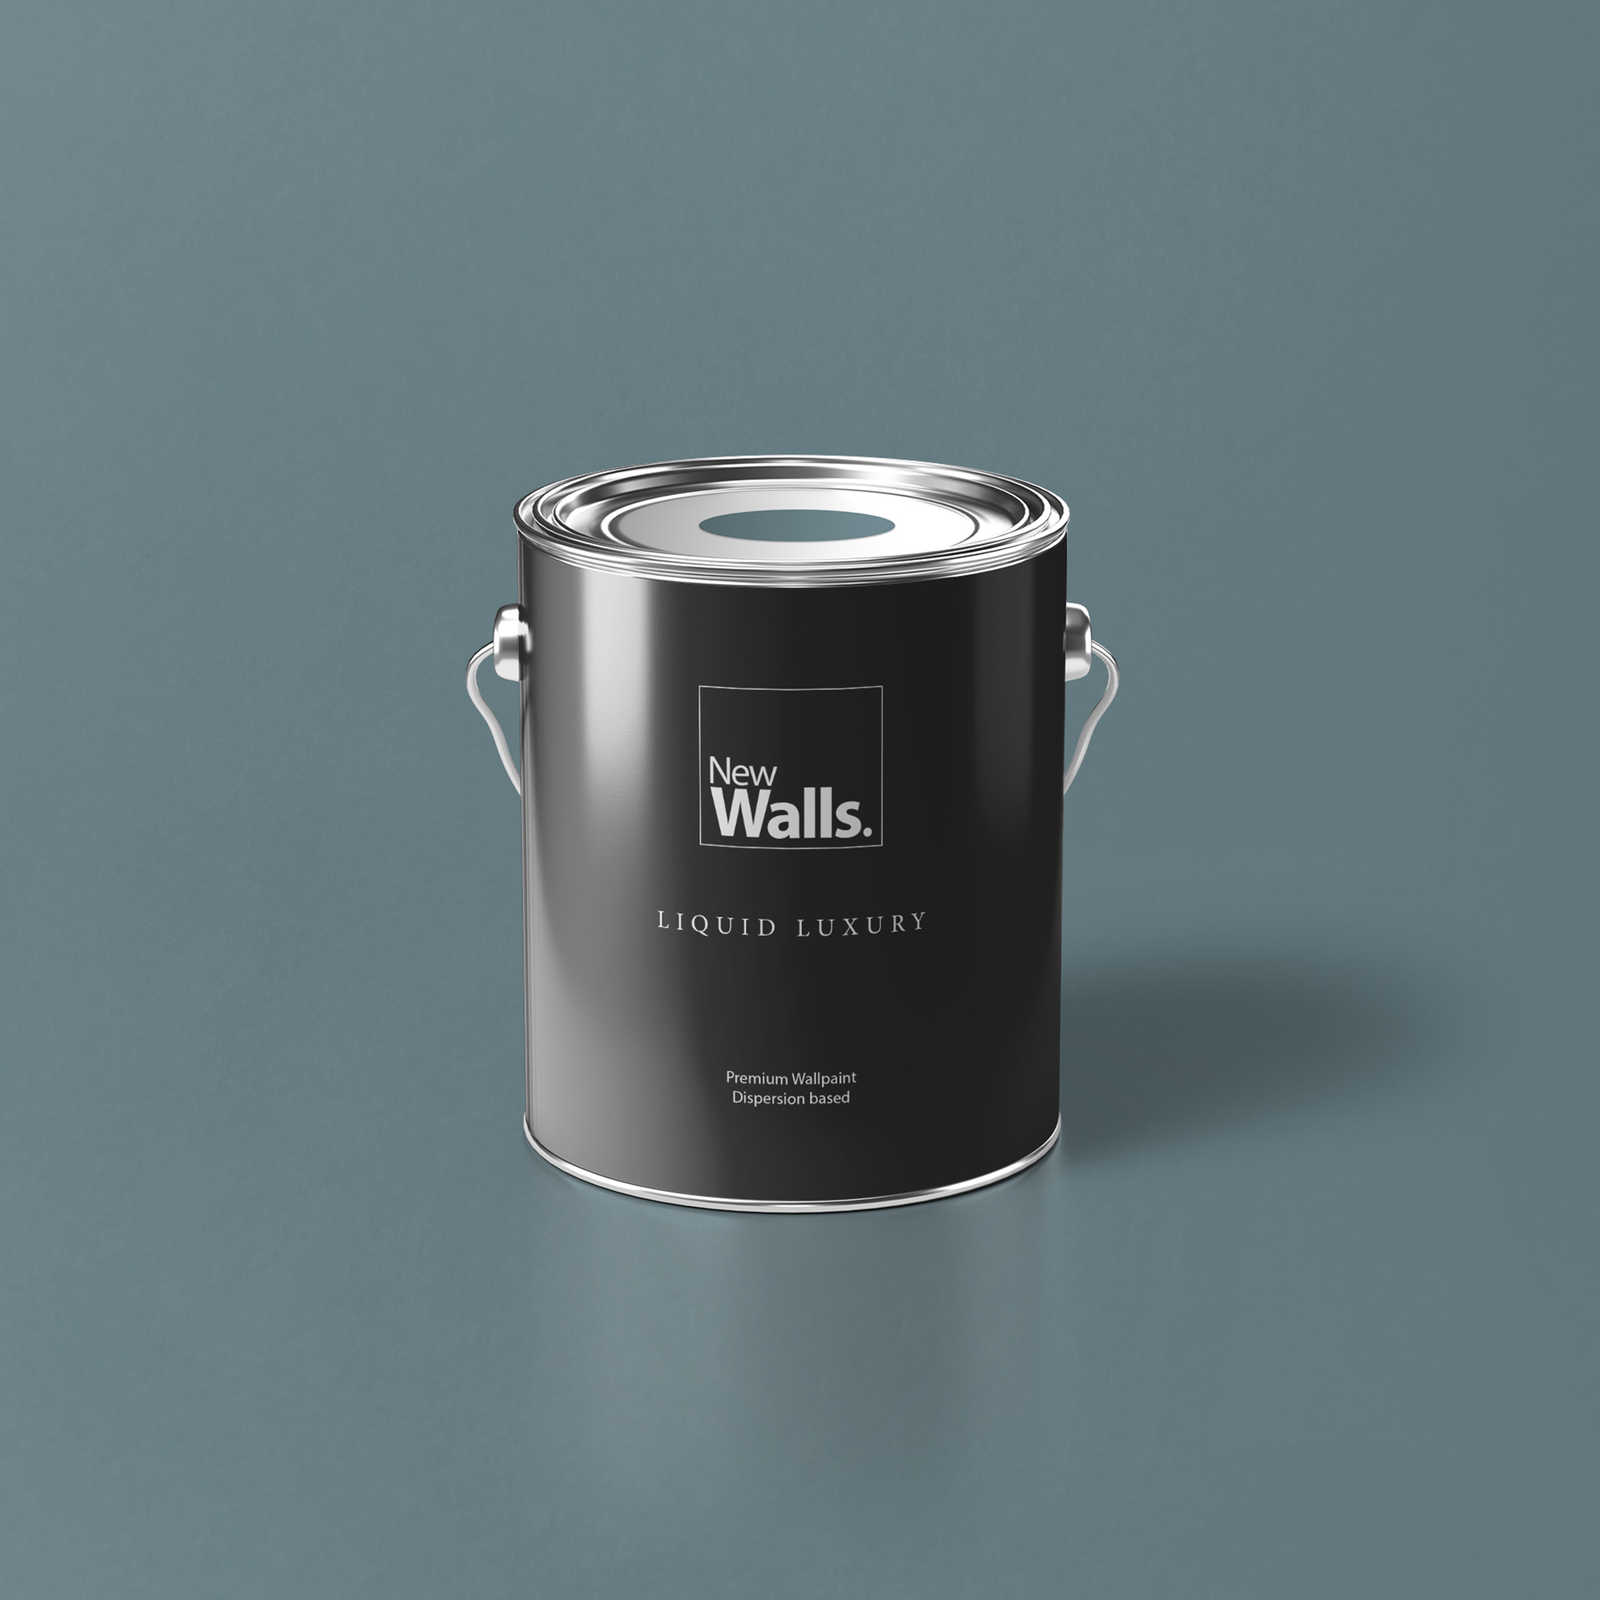 Premium Wall Paint Relaxing Dove Blue »Balanced Blue« NW311 – 2.5 litre
